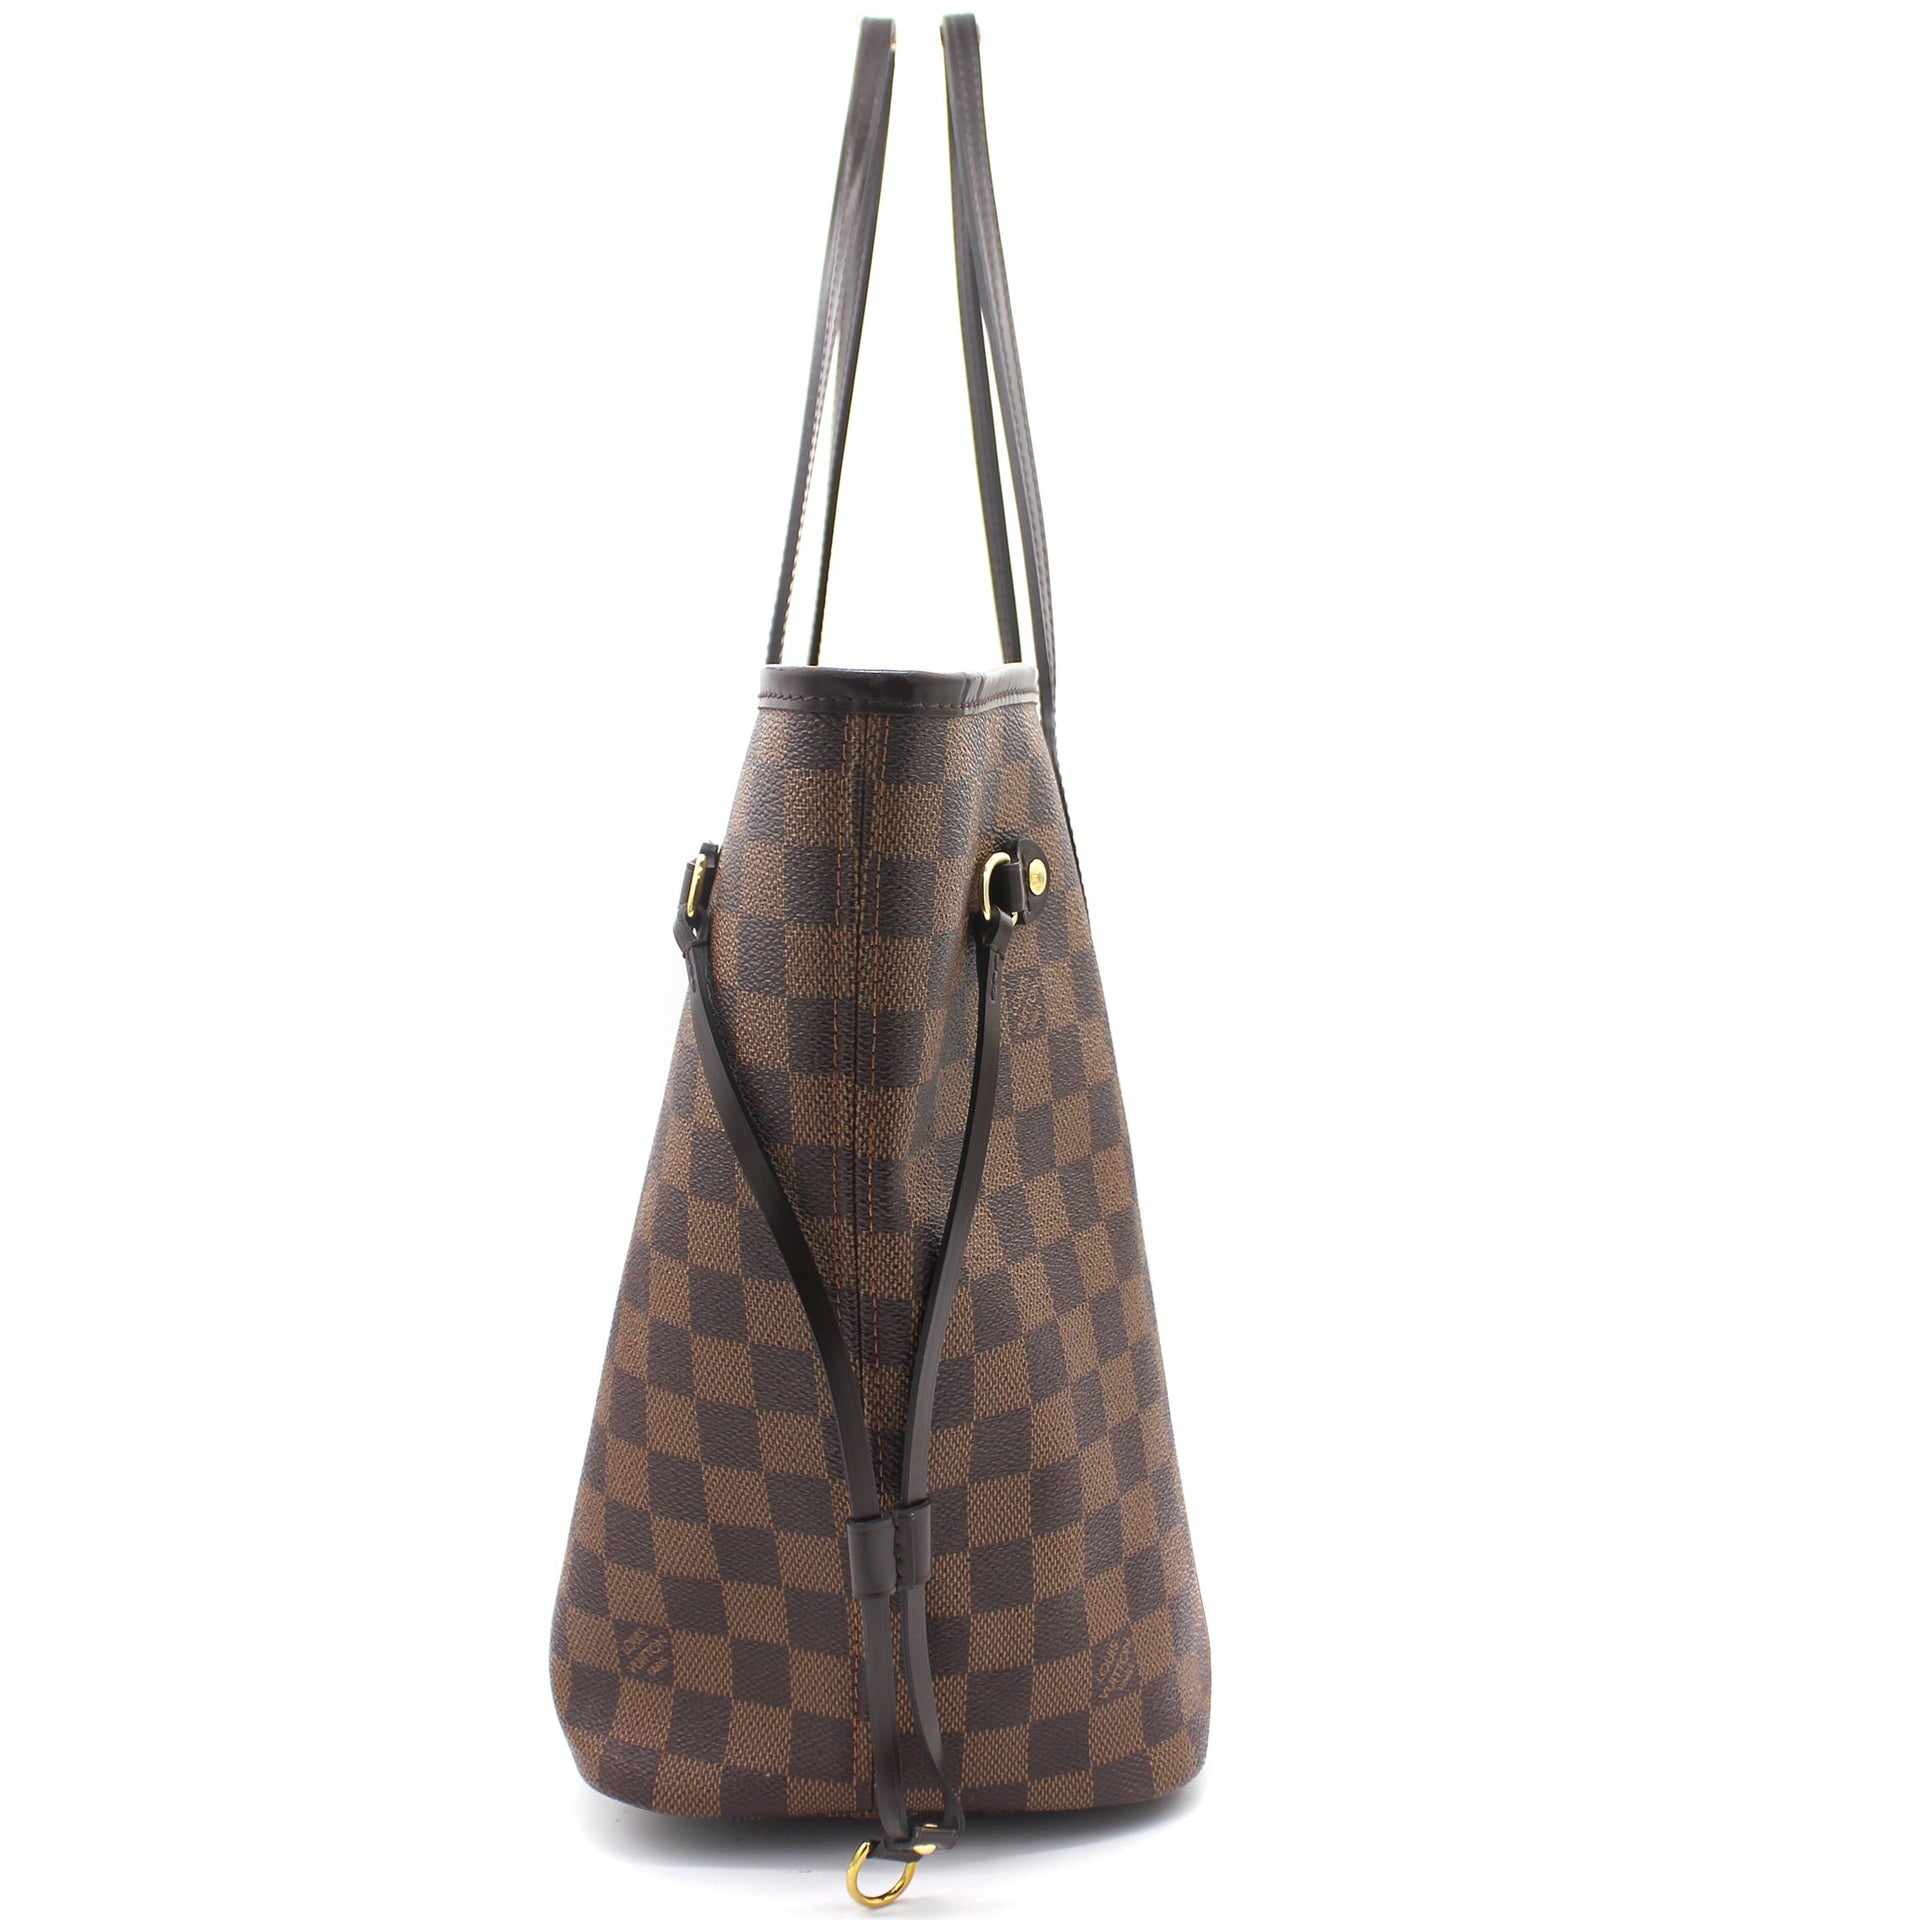 Louis Vuitton Neverfull MM Damier Ebene with Pouch- MISSING 1 LEATHER SIDE  CINCH